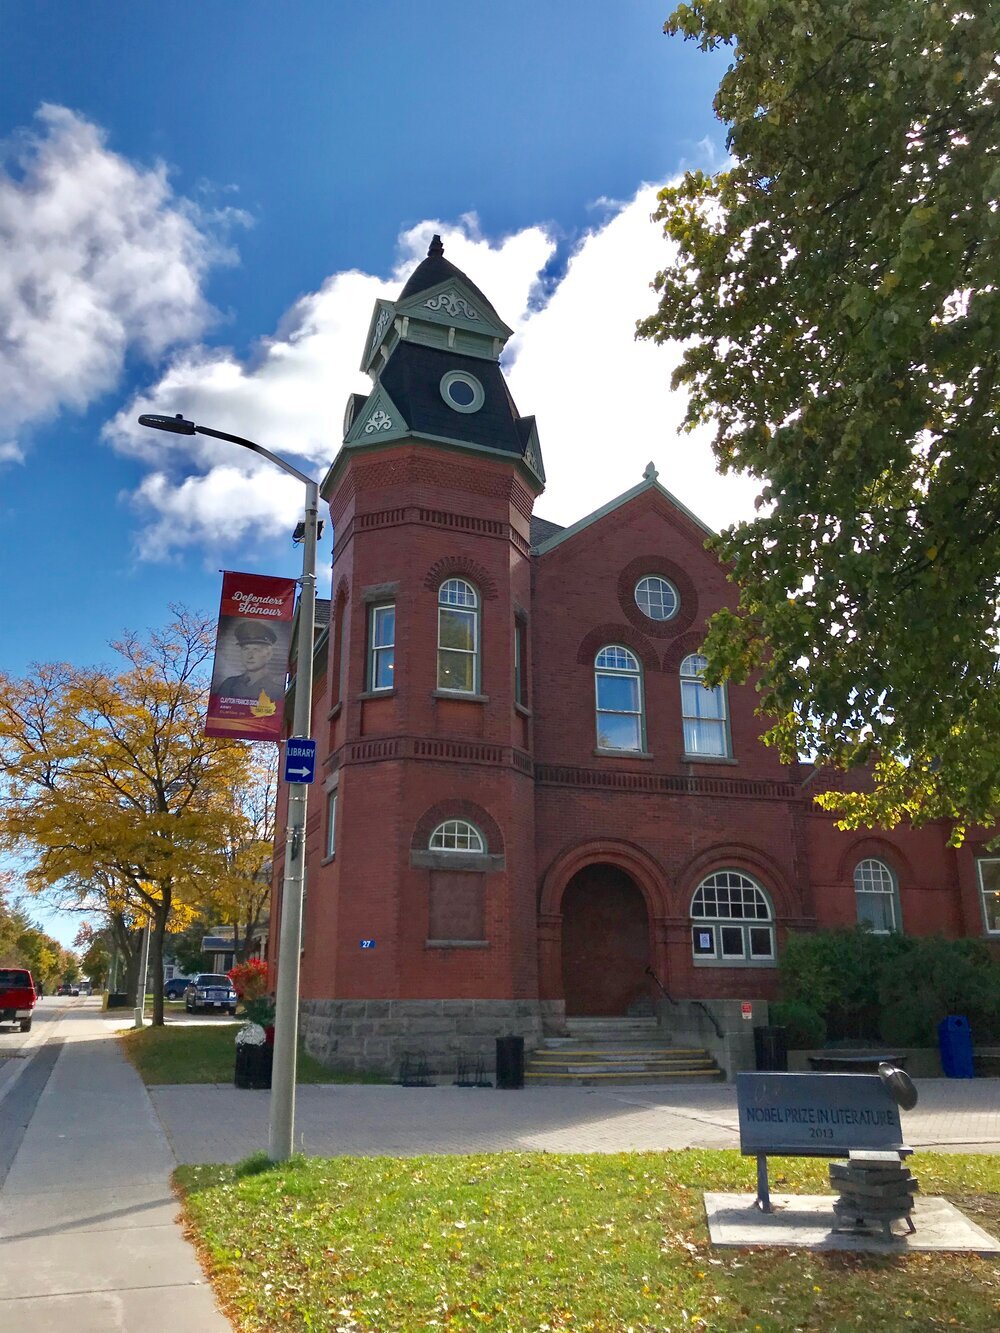 Clinton historic town hall with Alice Munro memorial and note the banner honouring those who have served our country.